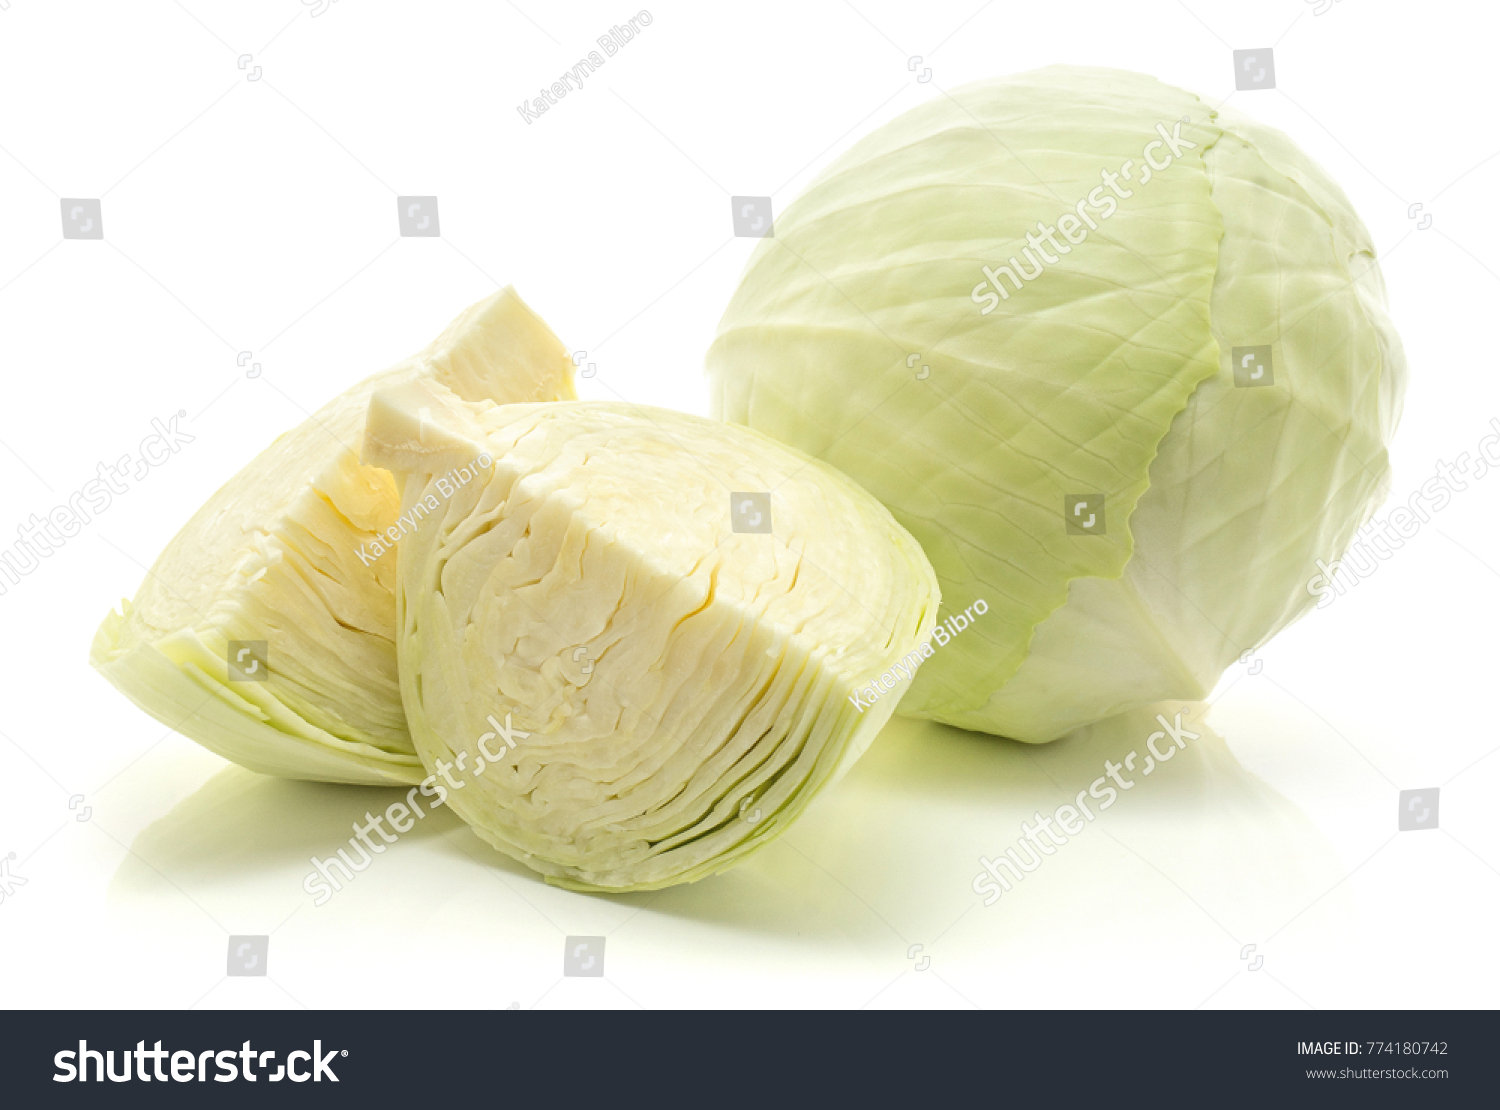 White cabbage isolated on white background one whole head and two quarters
 #774180742